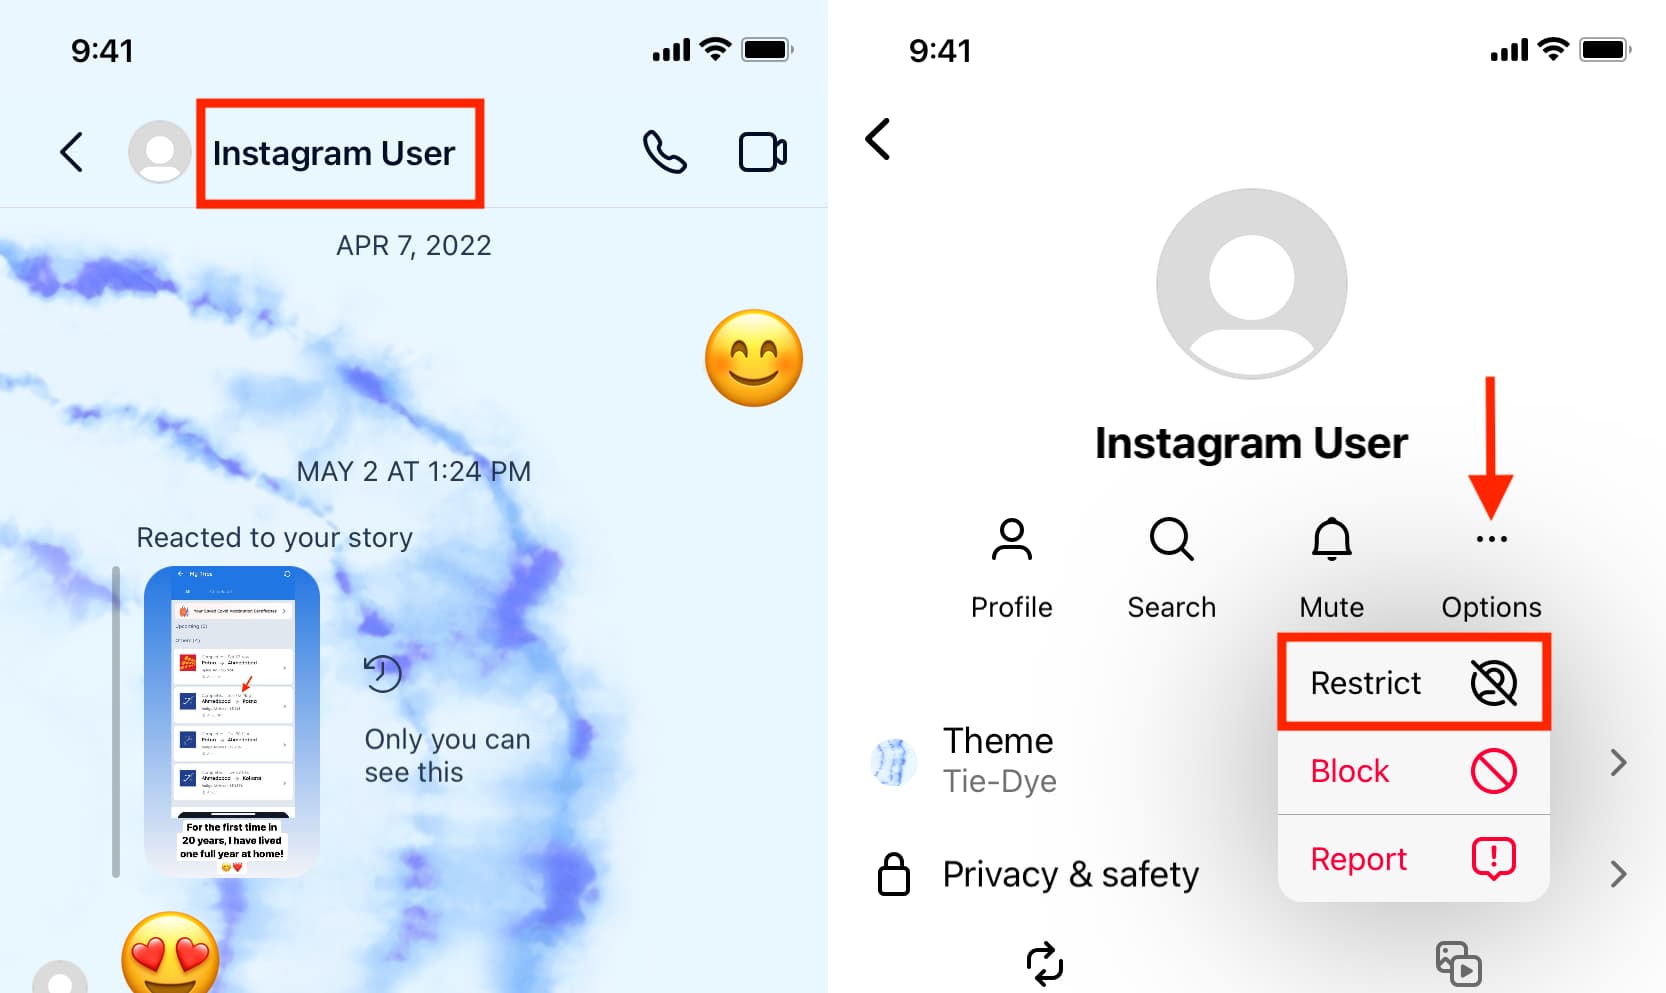 Restrict on Instagram from user's direct message